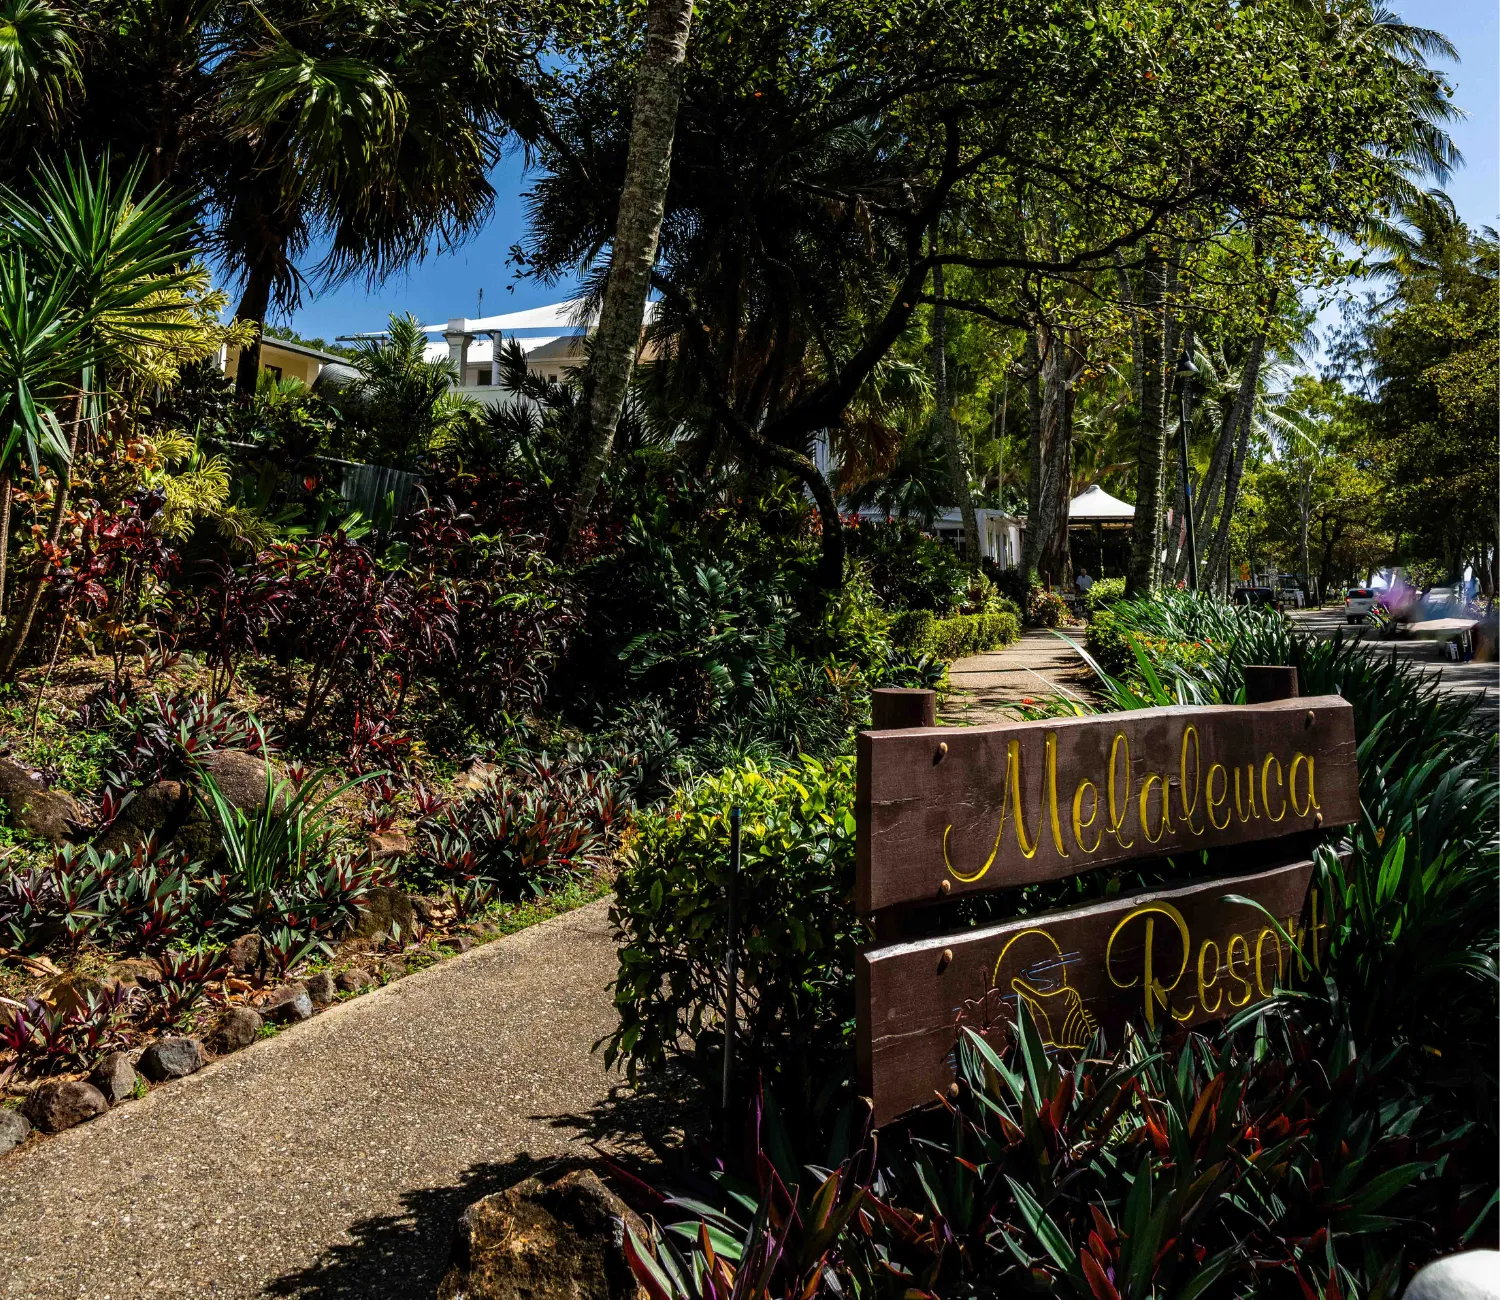 Pathway and gardens with Melaleuca Resort Signage